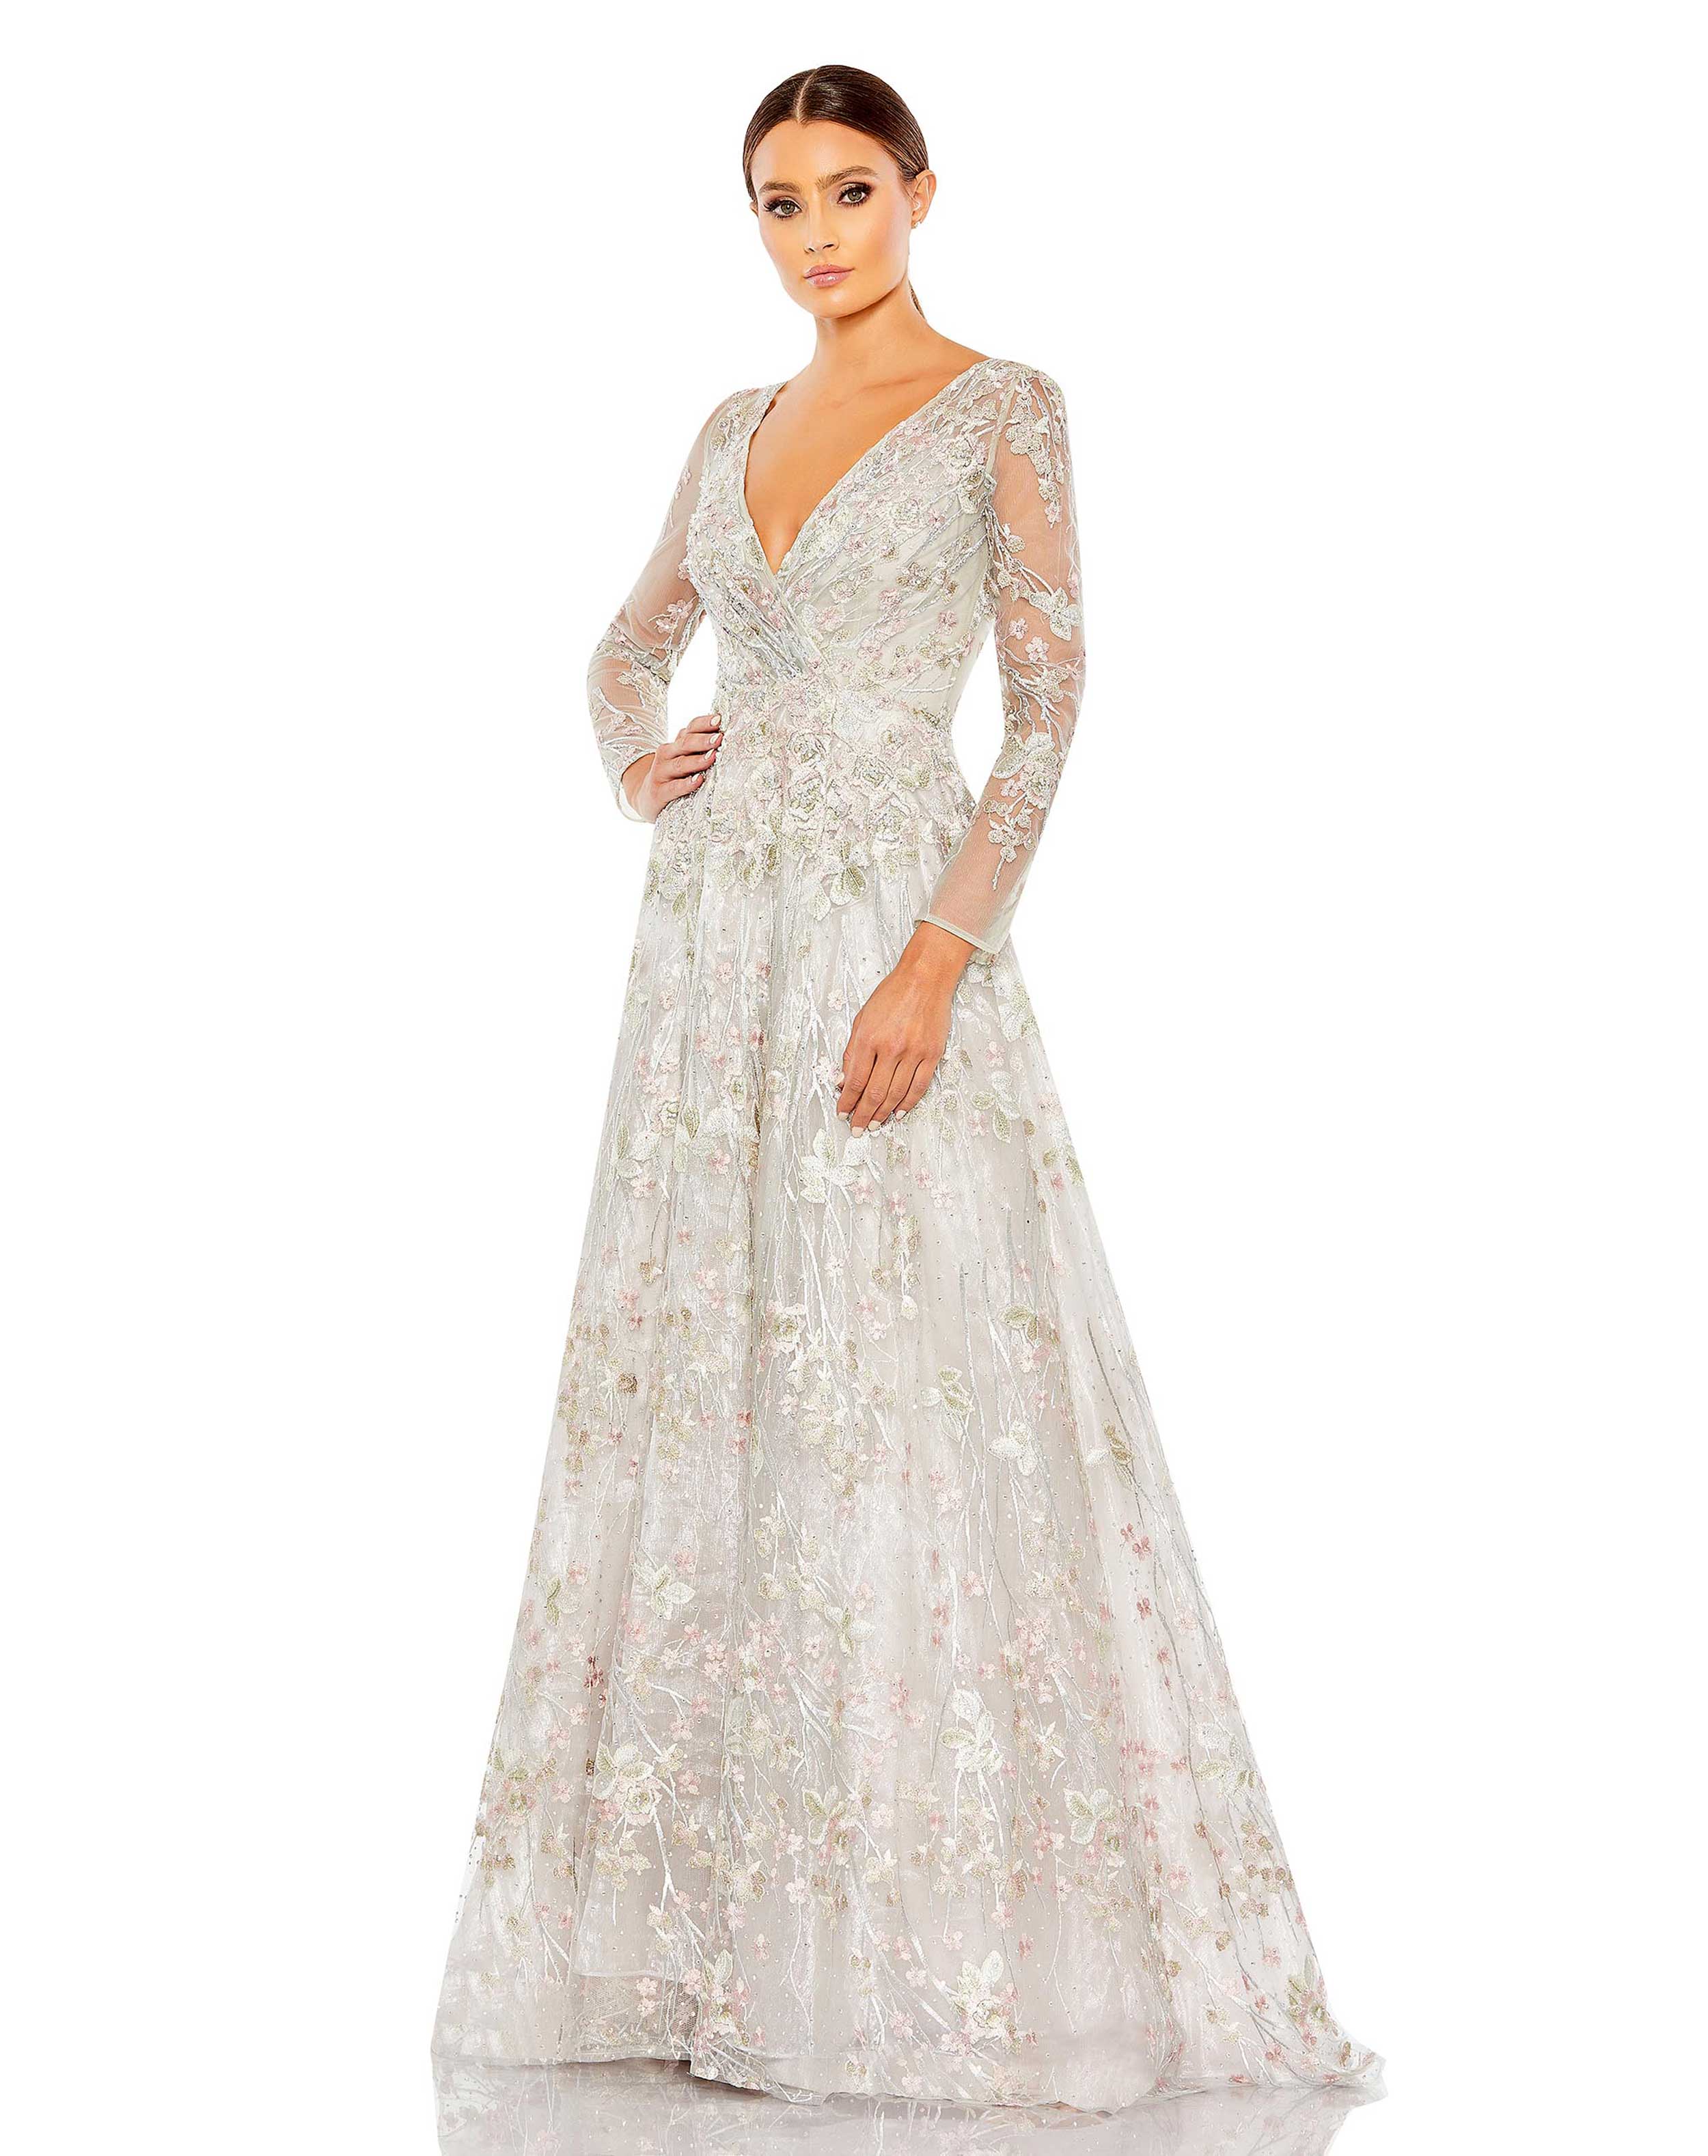 Embellished Wrap Over Illusion Long Sleeve A Line Gown